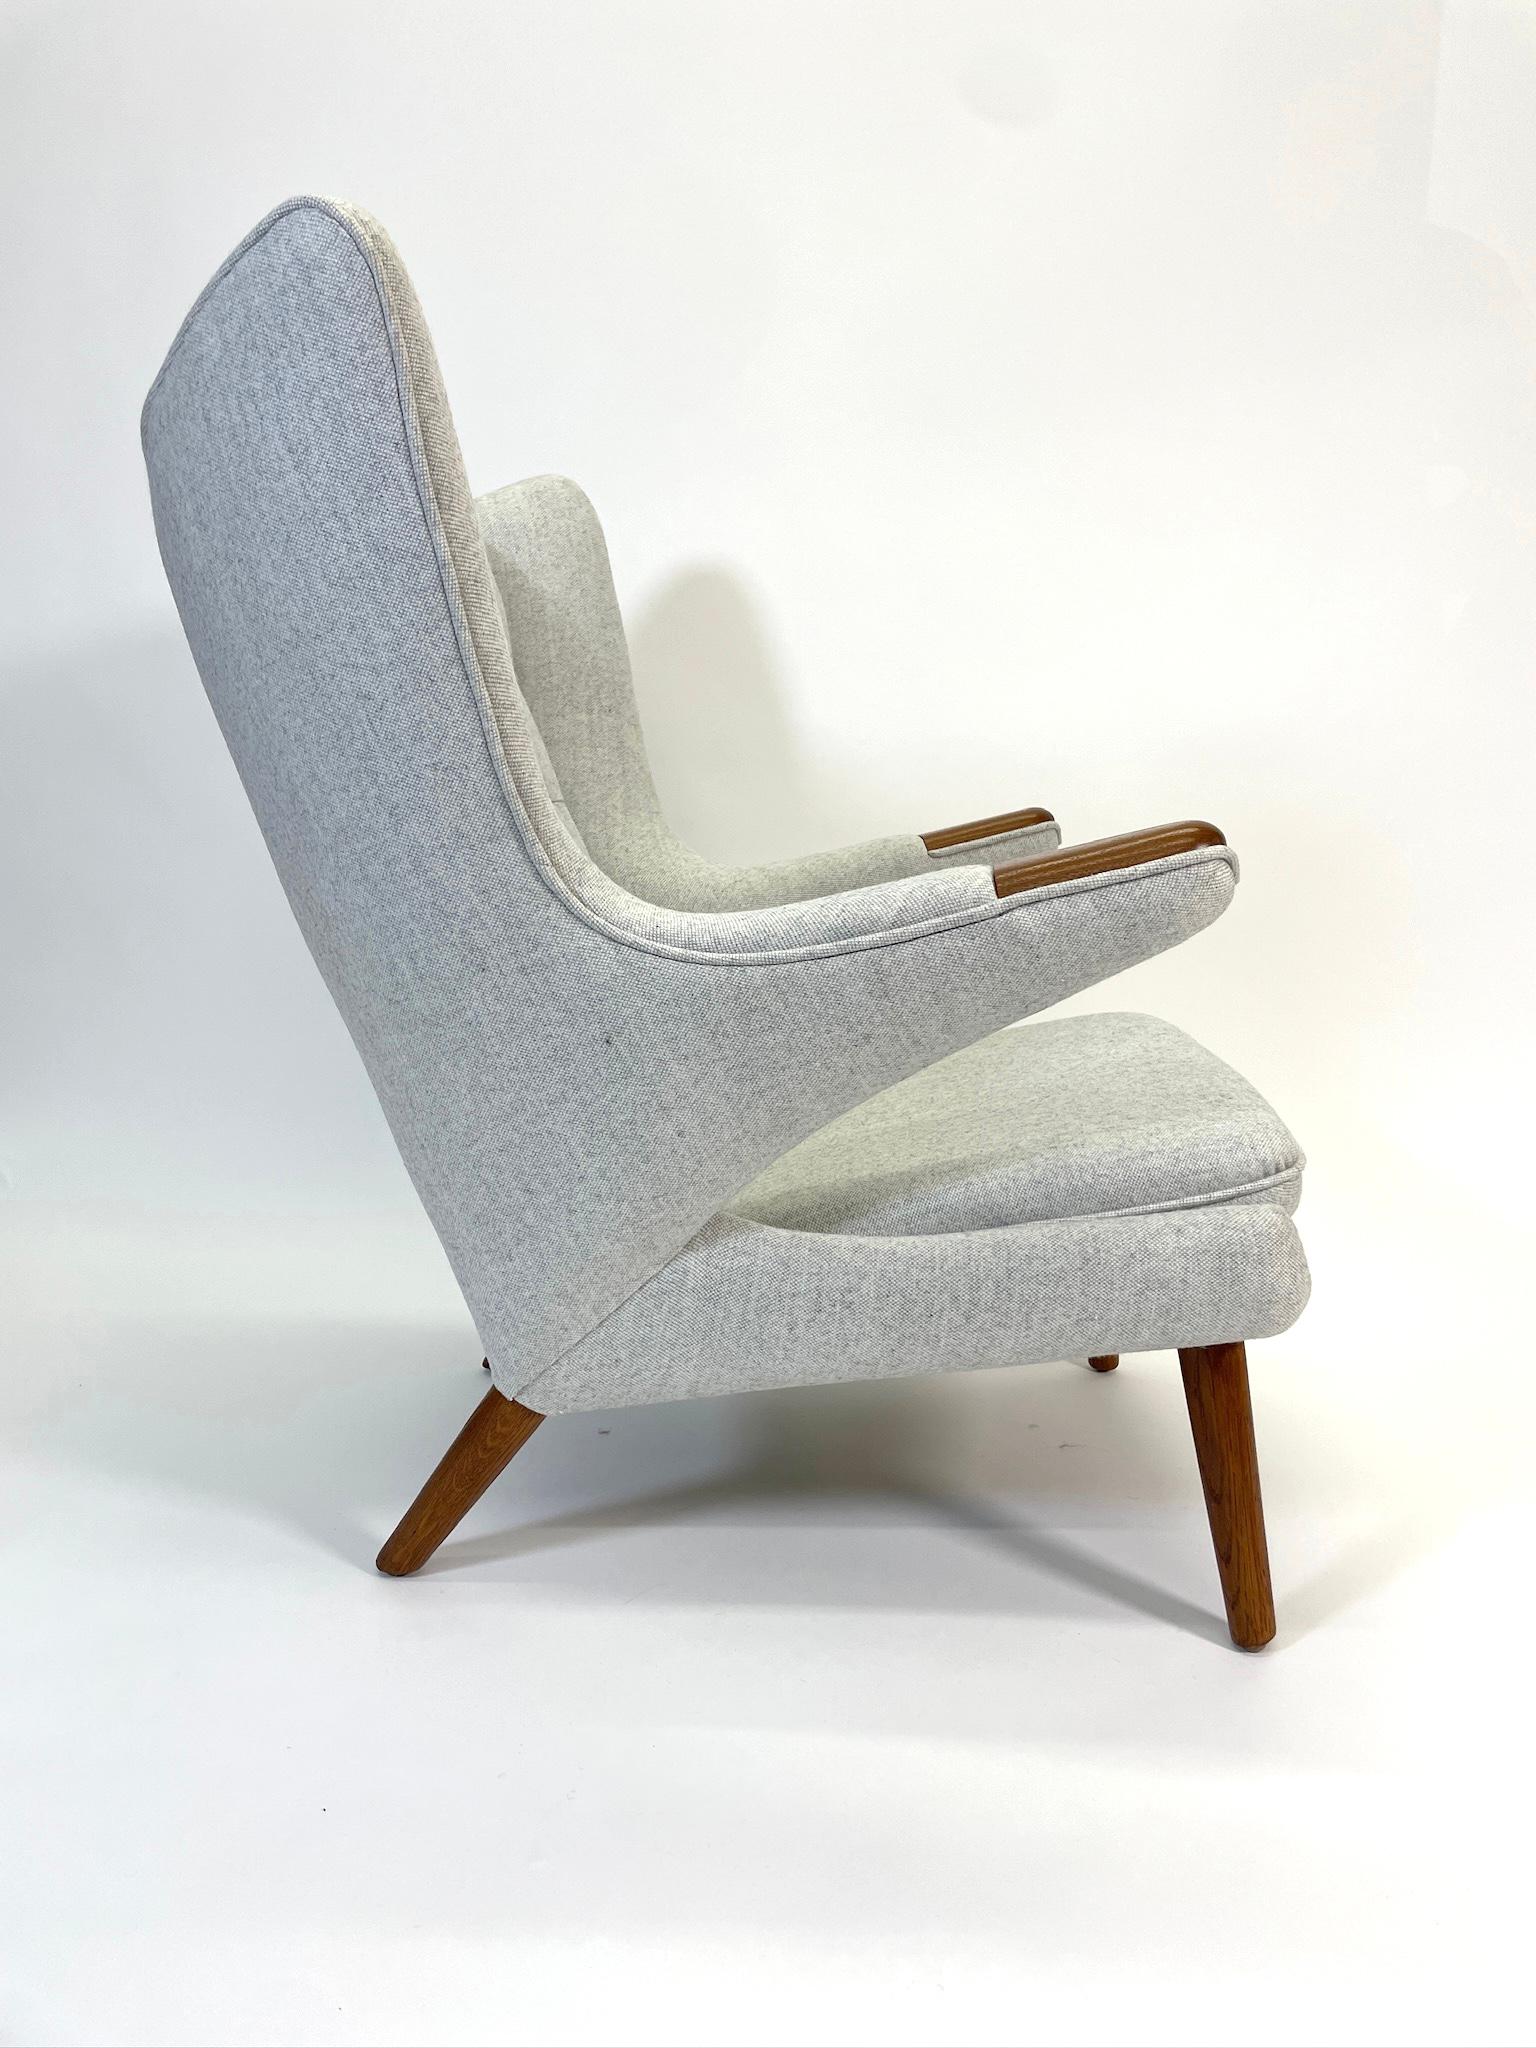 Hans Wegner Papa Bear Chairfor A.P. Stolen Denmark, 1950's In Good Condition For Sale In San Diego, CA